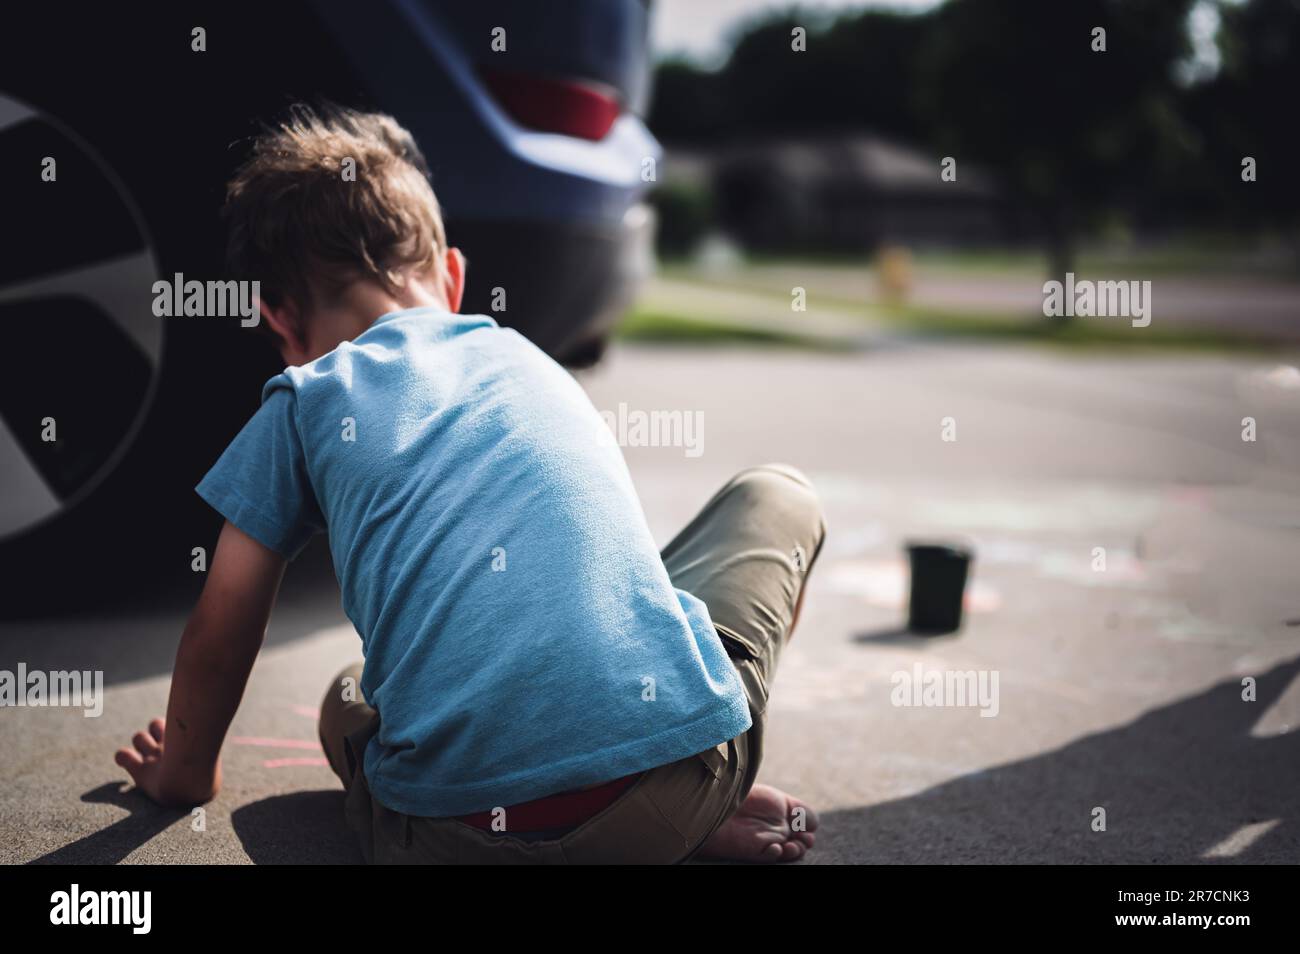 Children sitting on a driveway behind a vehicle in a blind spot out of view of the driver.  Stock Photo